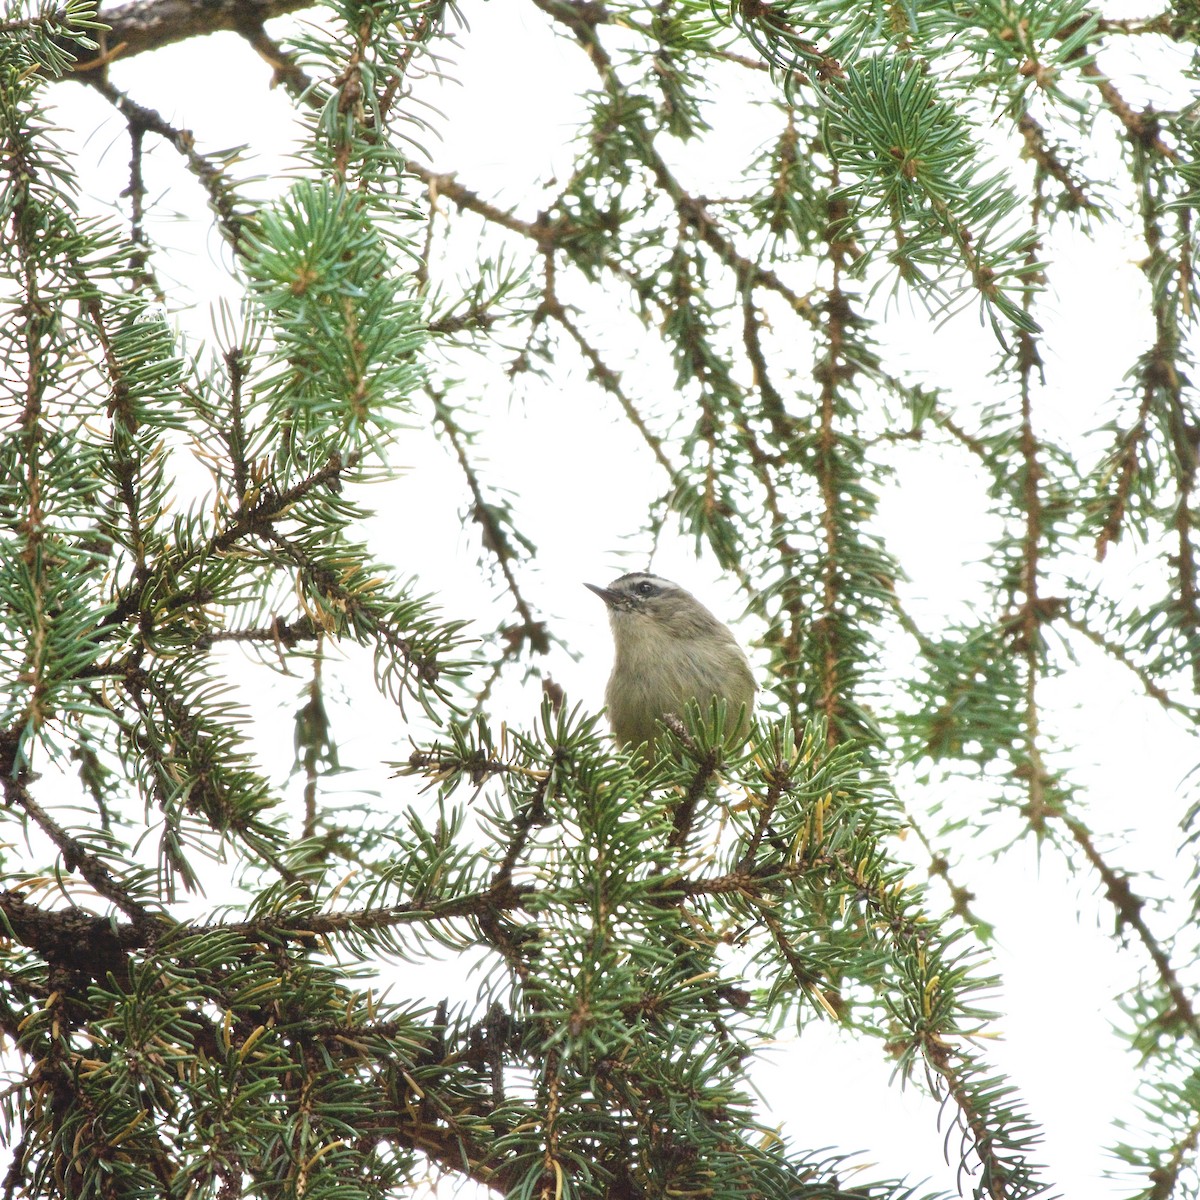 Golden-crowned Kinglet - Russell Moses